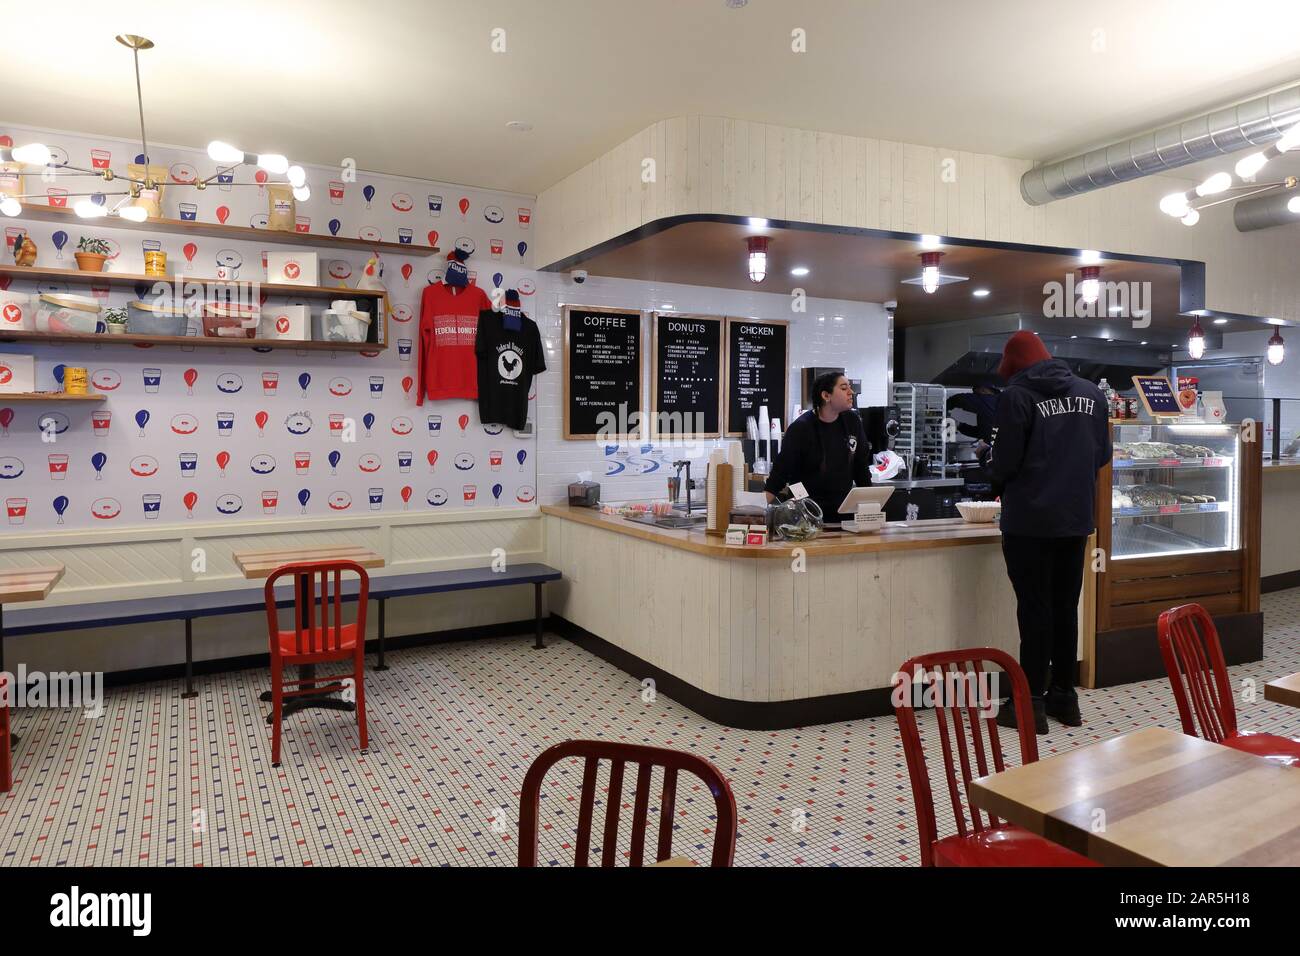 Federal Donuts, 540 South St, Philadelphia, PA. interior of a coffee shop serving fried chicken and cake donuts in Queens Village. Stock Photo